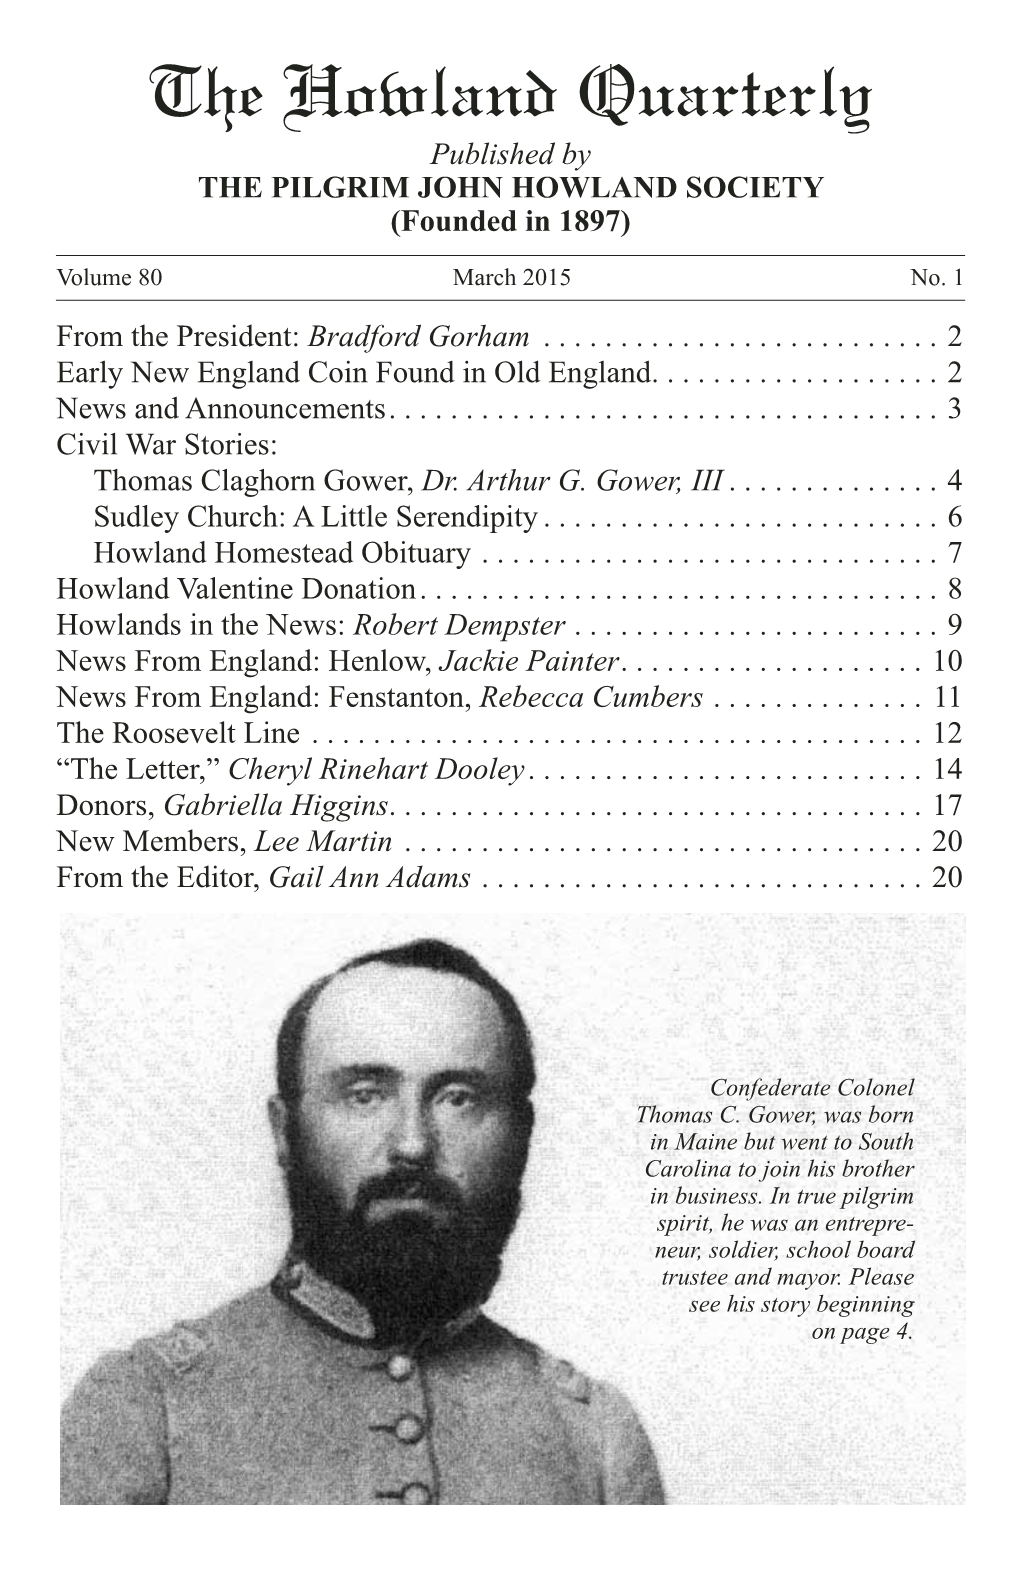 The Howland Quarterly Published by the PILGRIM JOHN HOWLAND SOCIETY (Founded in 1897)